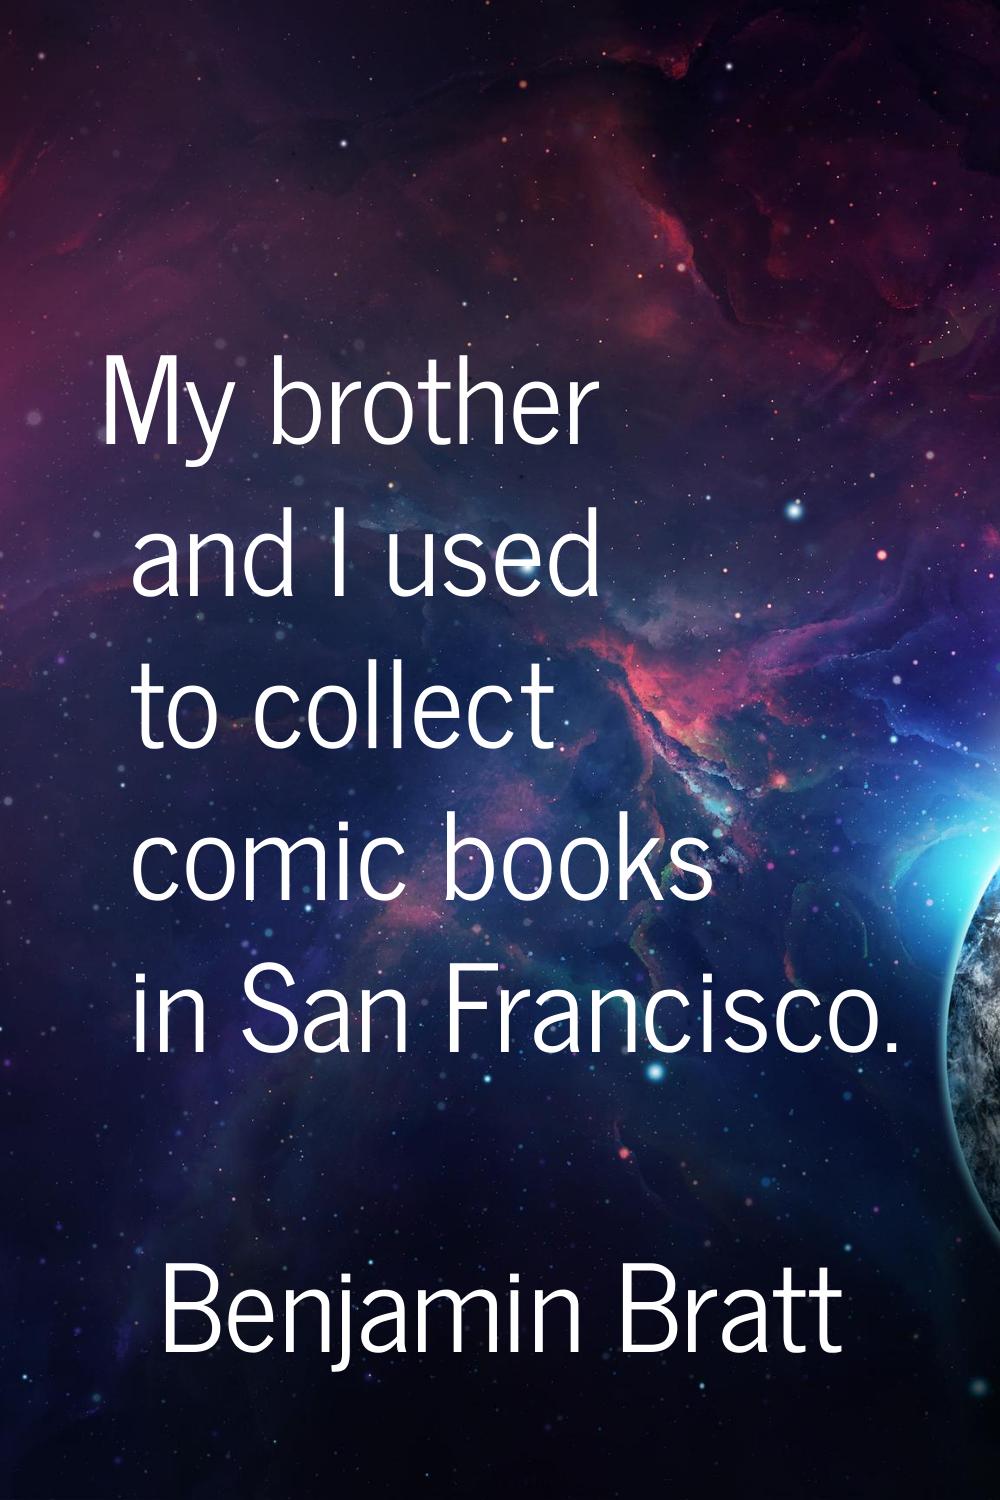 My brother and I used to collect comic books in San Francisco.